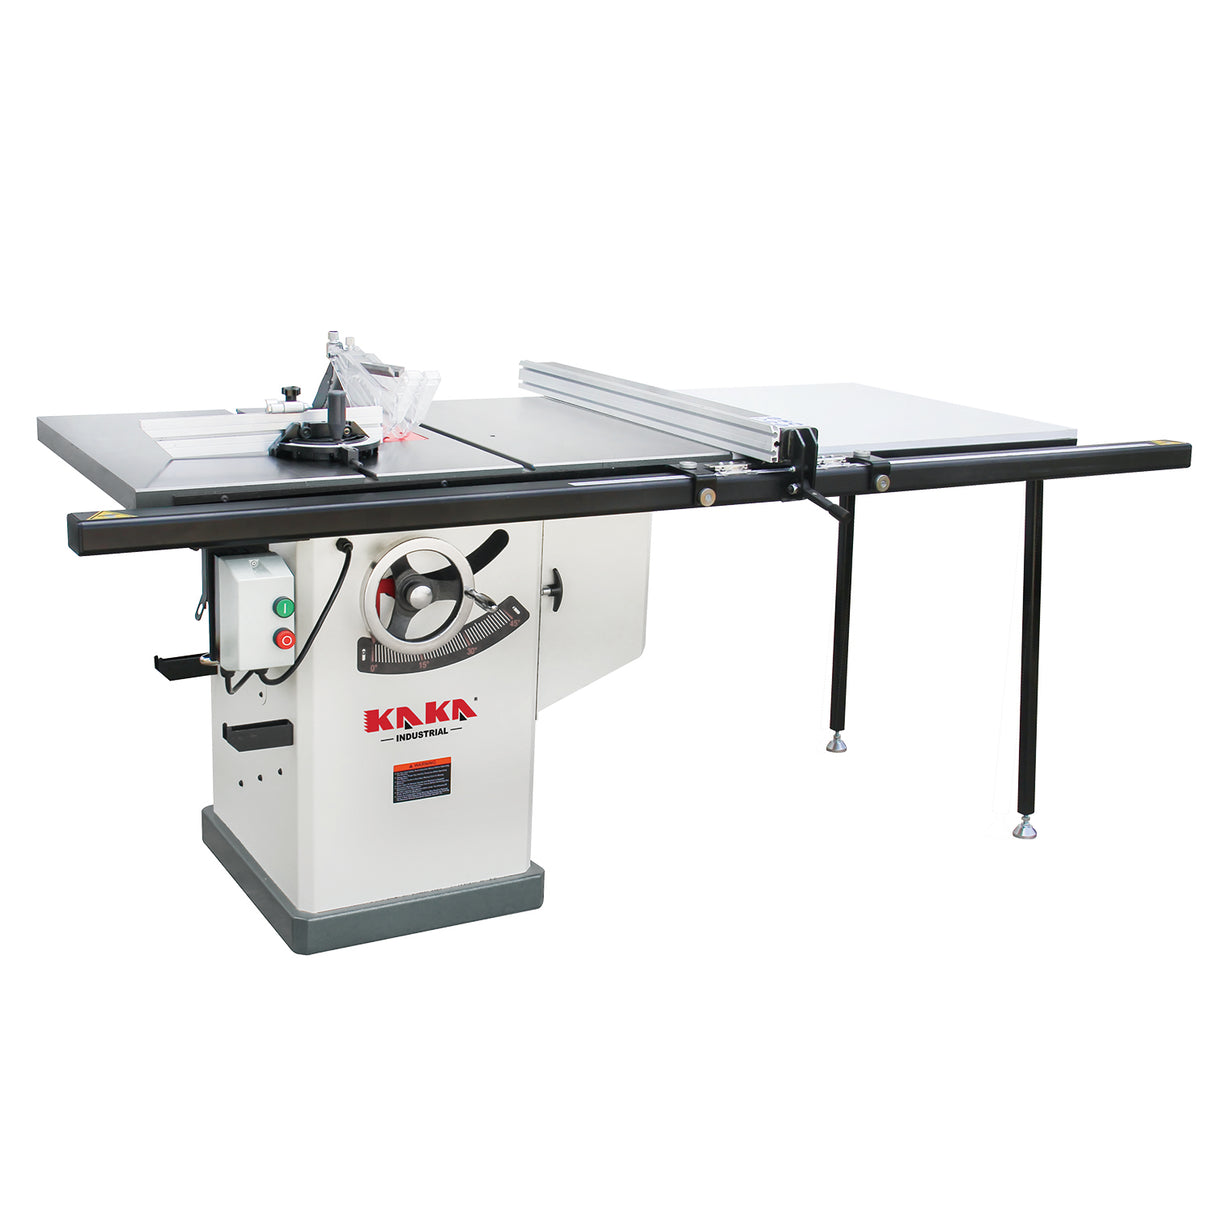 Kaka industrial WTS-1050 10“Table Saw With Riving Knife & Extension Table 220V-60HZ-1PH